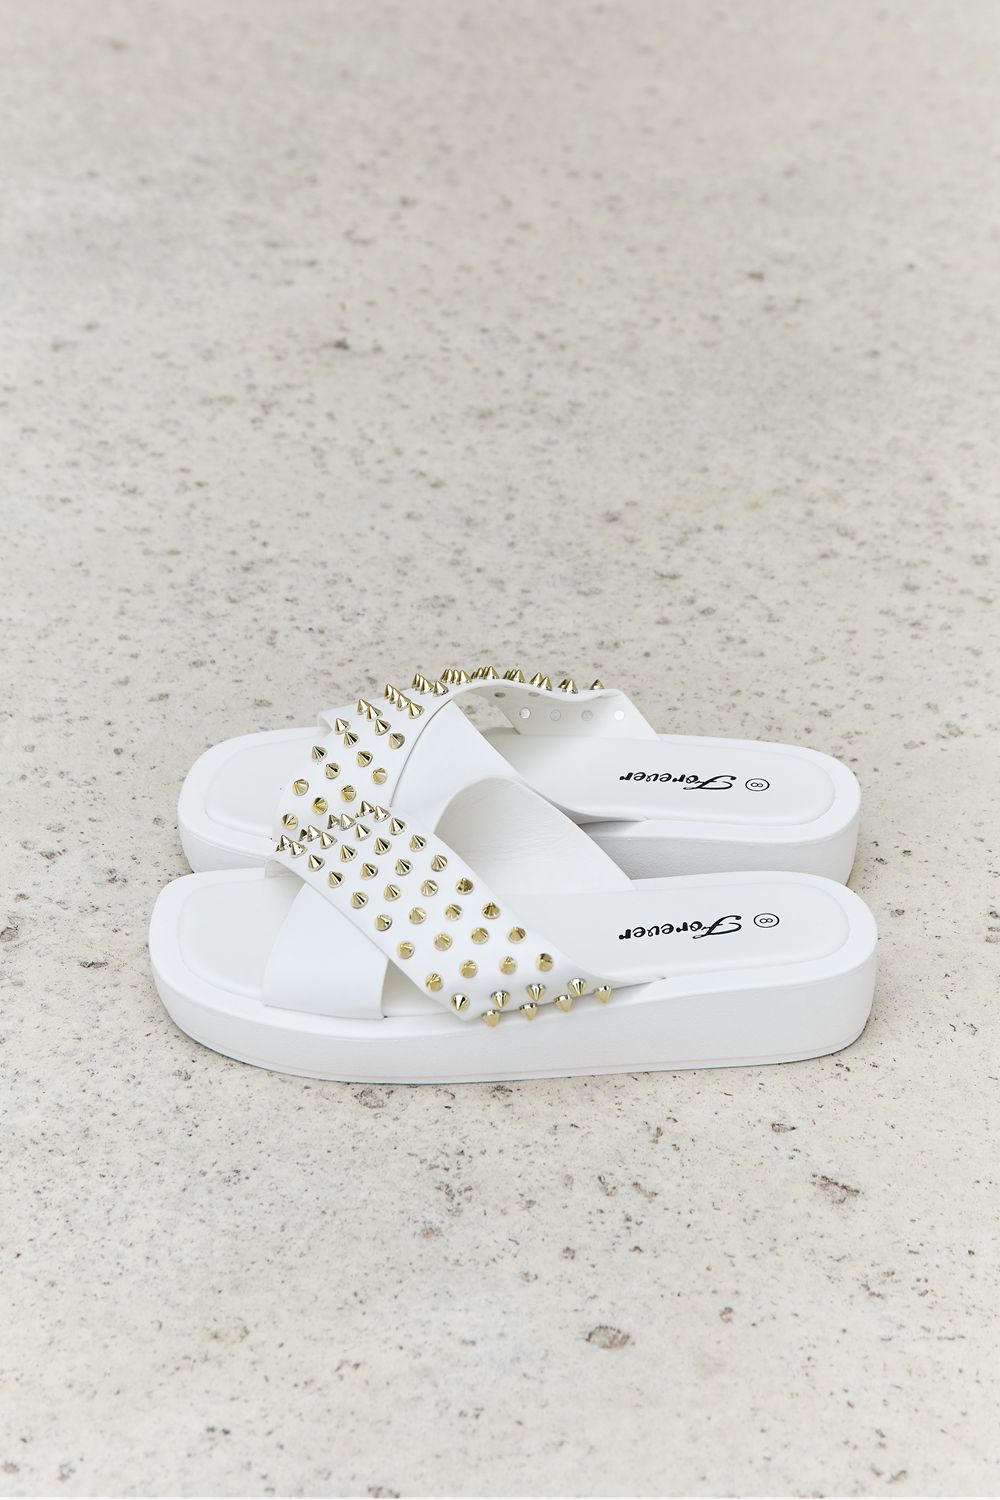 Forever Link Studded Cross Strap Sandals in White free shipping -Oh Em Gee Boutique